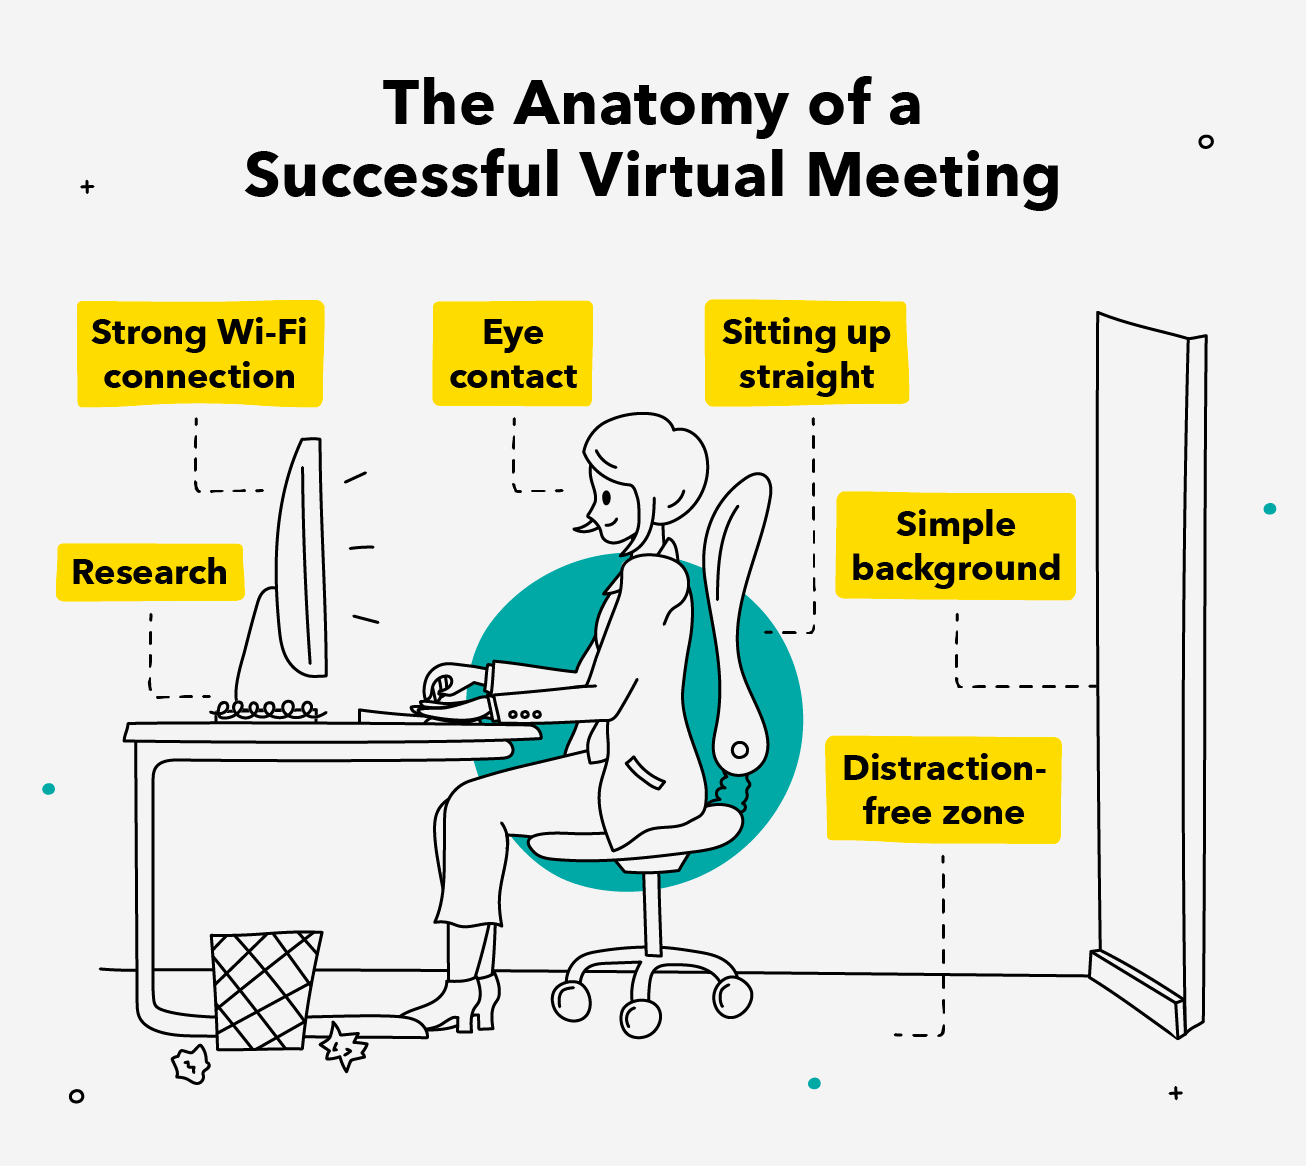 The Anatomy of a Successful Virtual Meeting